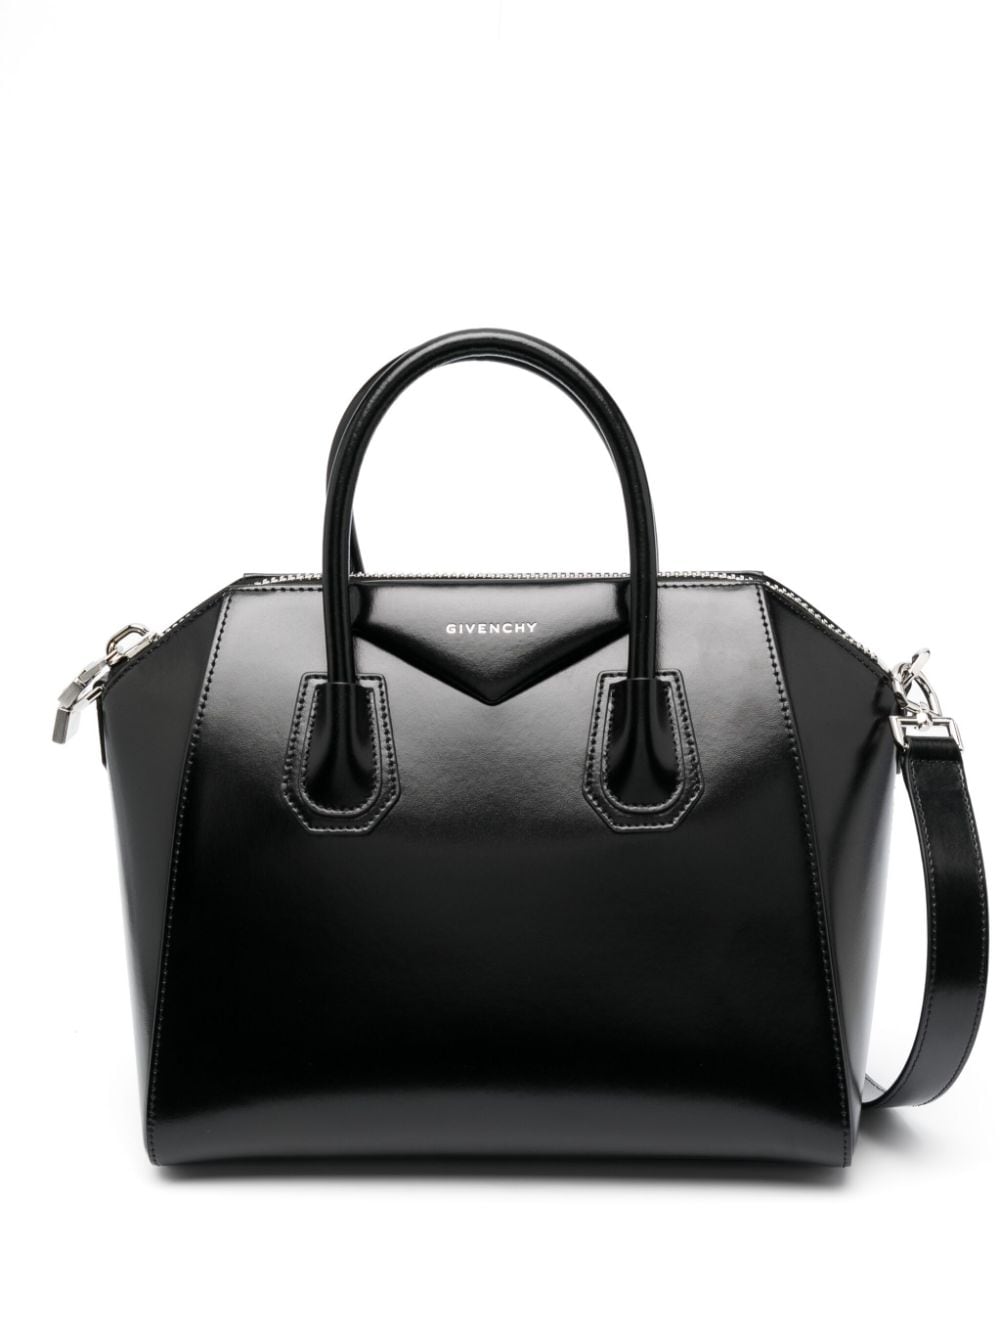 GIVENCHY Small Antigona Black Leather Tote with Detachable Strap and Silver-Tone Accents